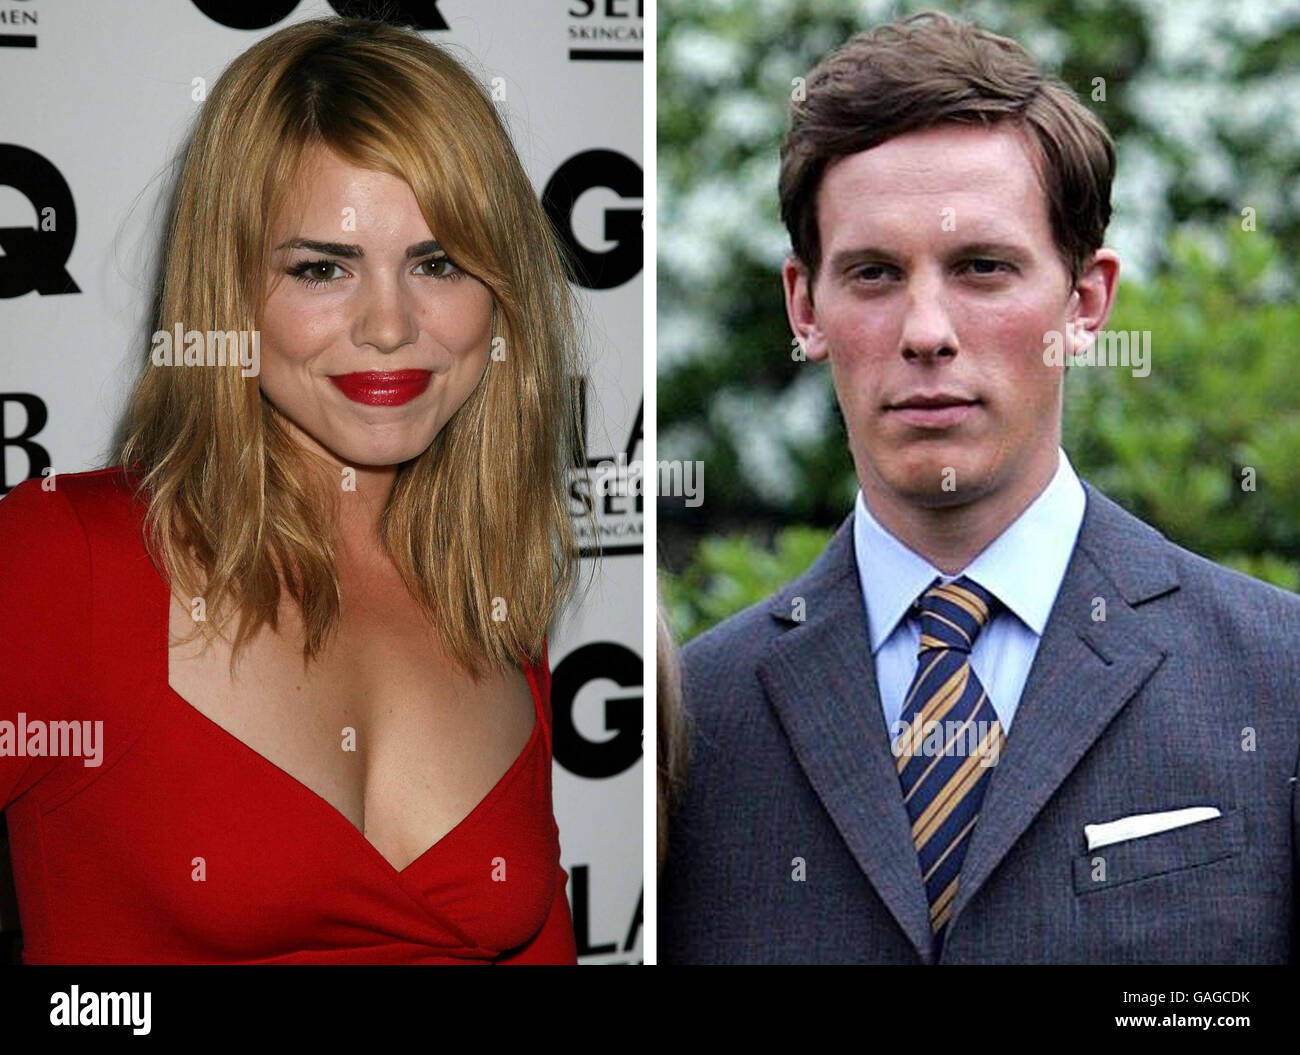 Composite of file images, dated 05-09-2006 and 11-05-2005. Actors Billie Piper, and Laurence Fox, who are reportedly to be married in a New Year's Eve ceremony. Stock Photo